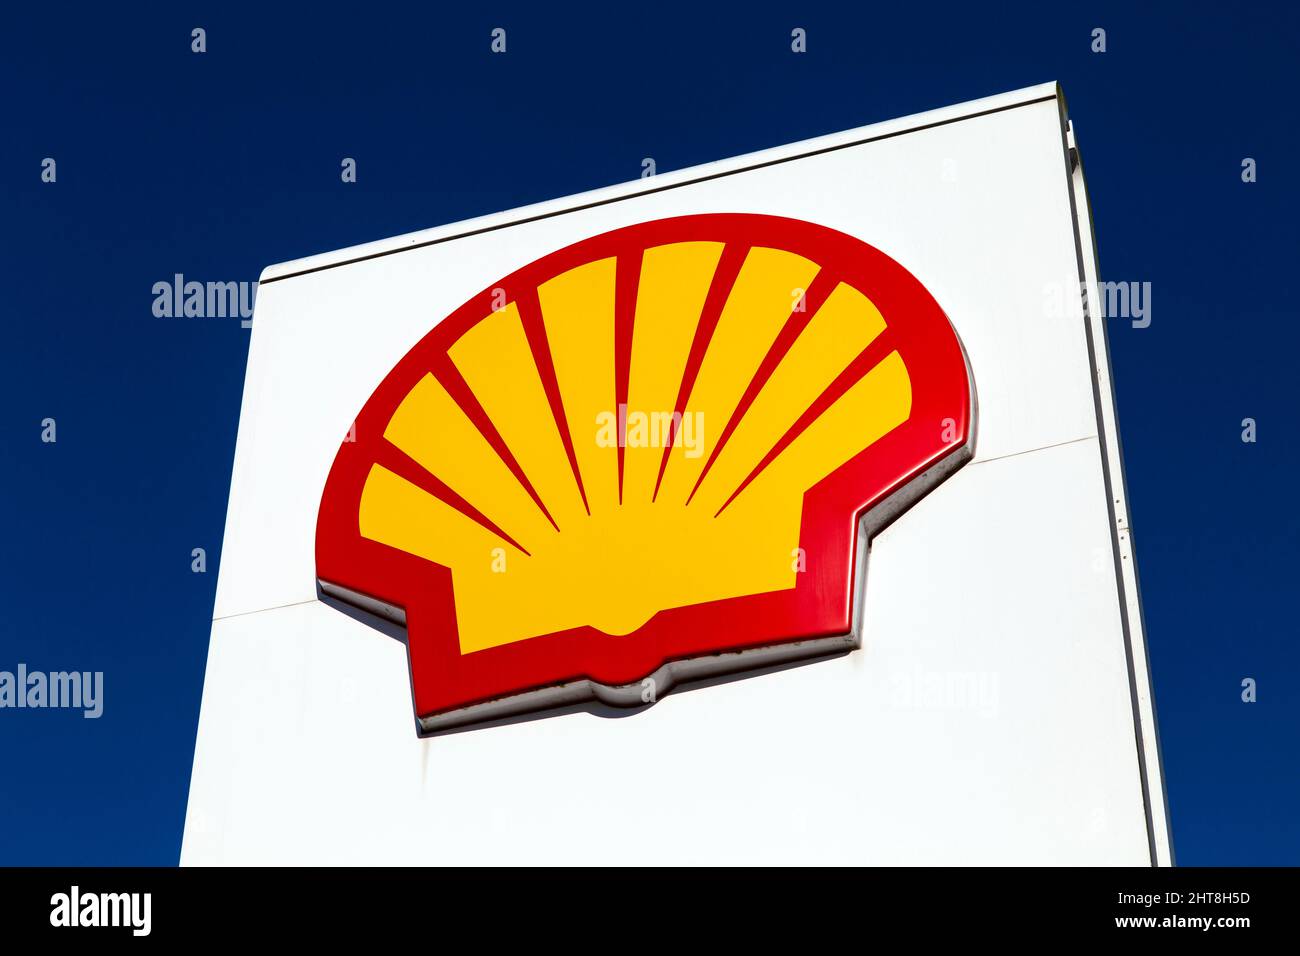 Close-up of Shell oil company logo at one of their petrol stations Stock Photo